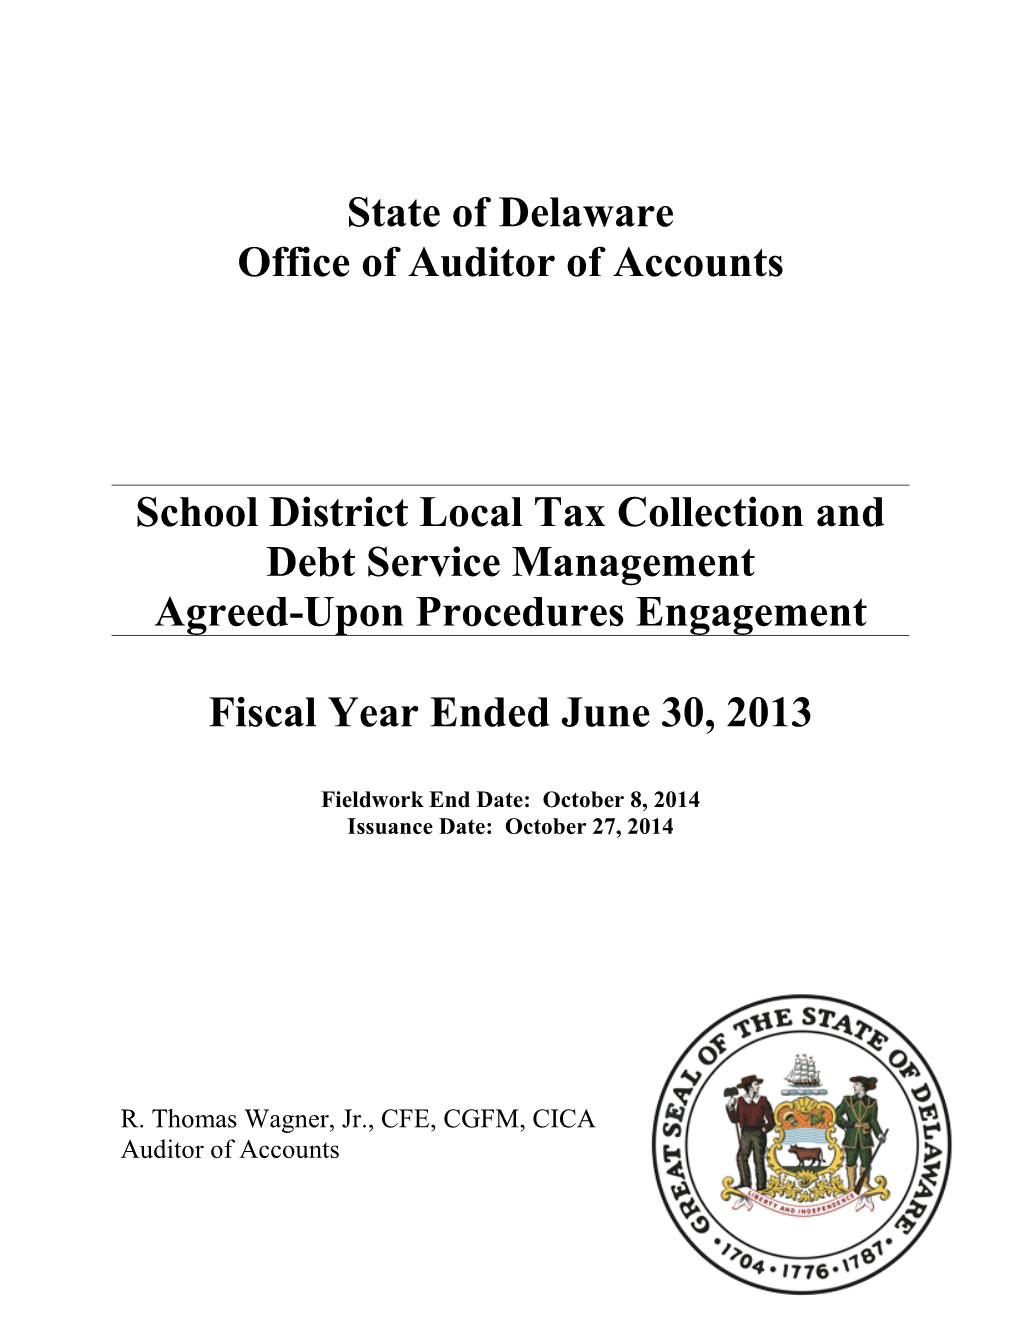 State of Delaware Office of Auditor of Accounts School District Local Tax